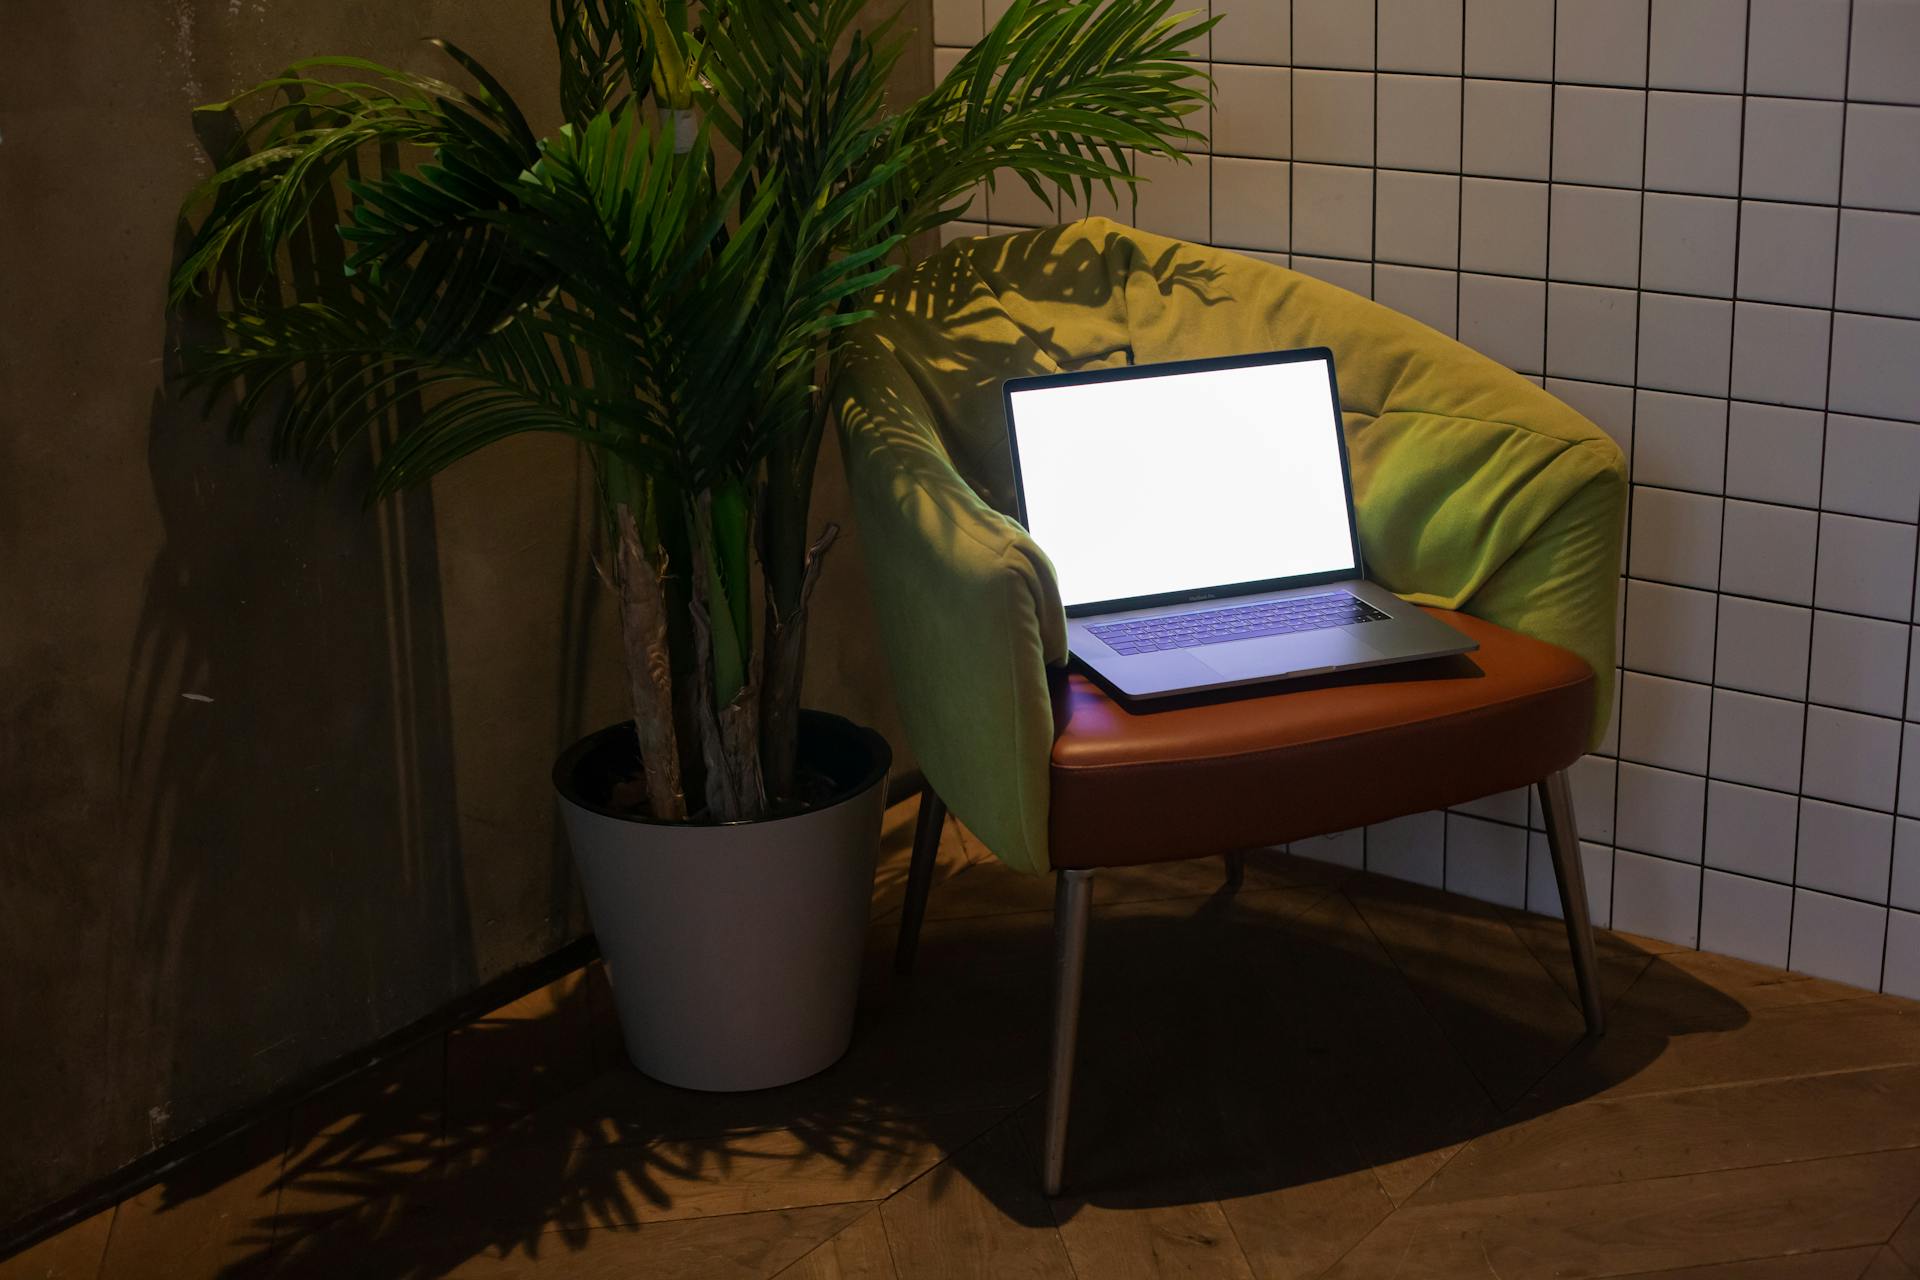 An open laptop on a chair | Source: Pexels